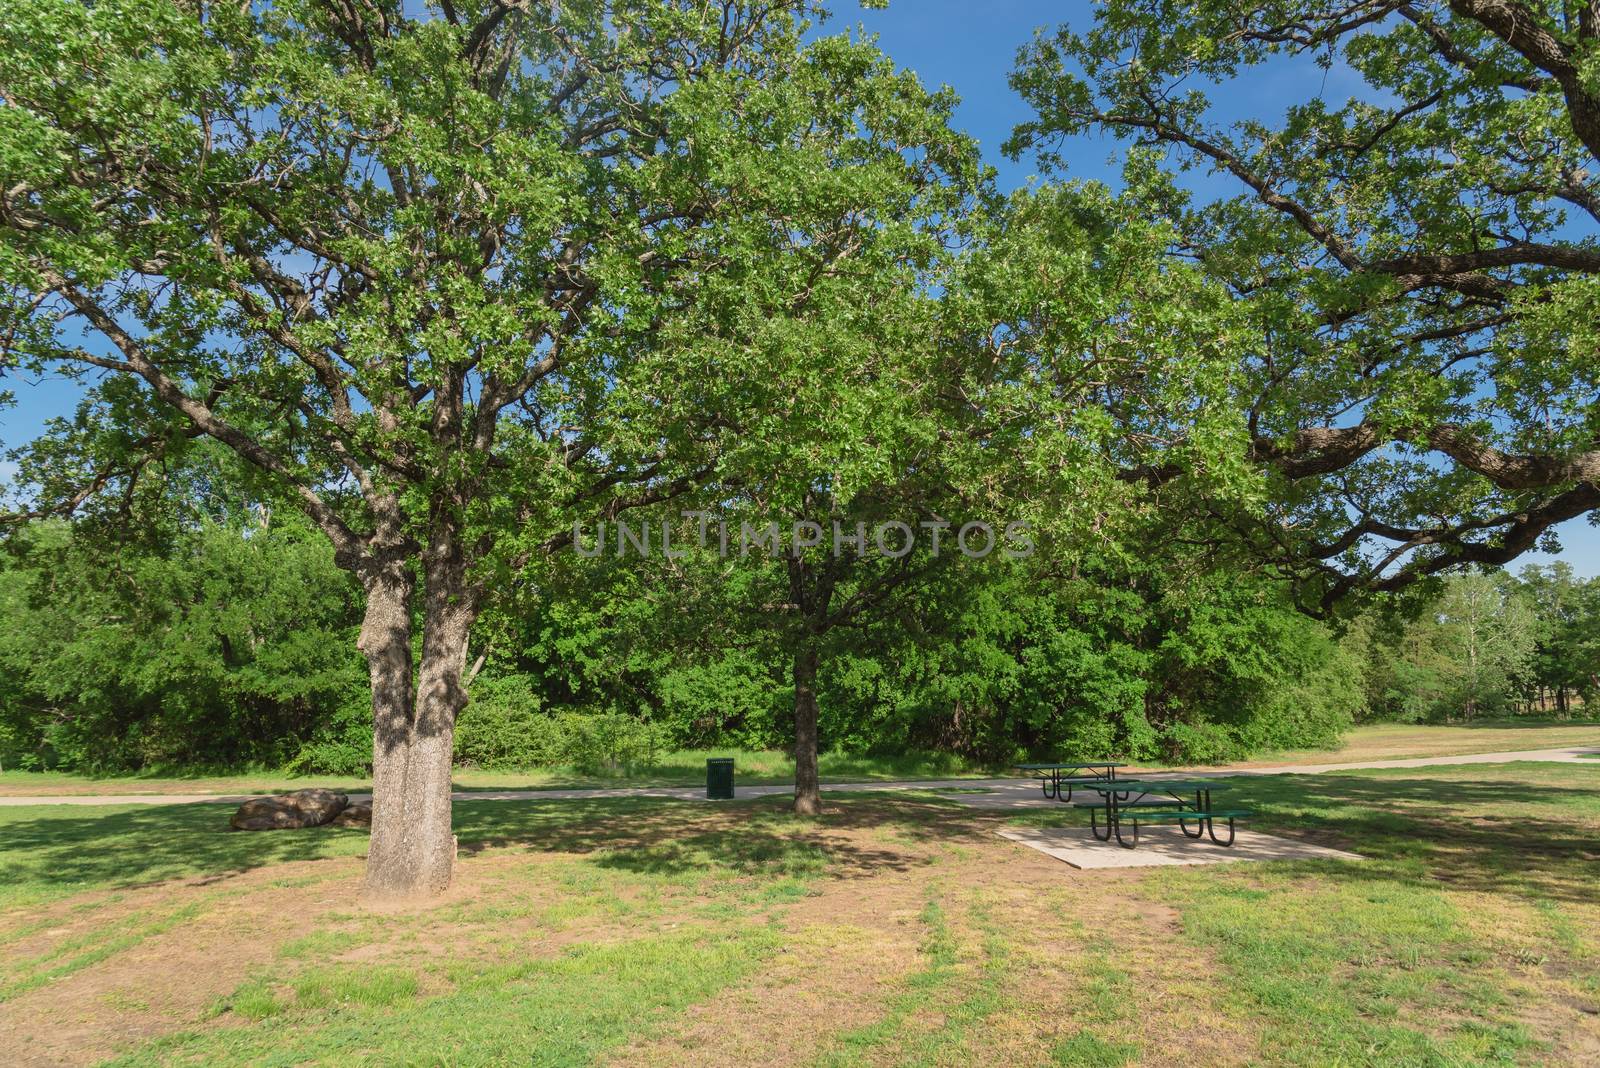 Public city park near Dallas, Texas, USA with picnic table, bin trash, trail and a lot of trees